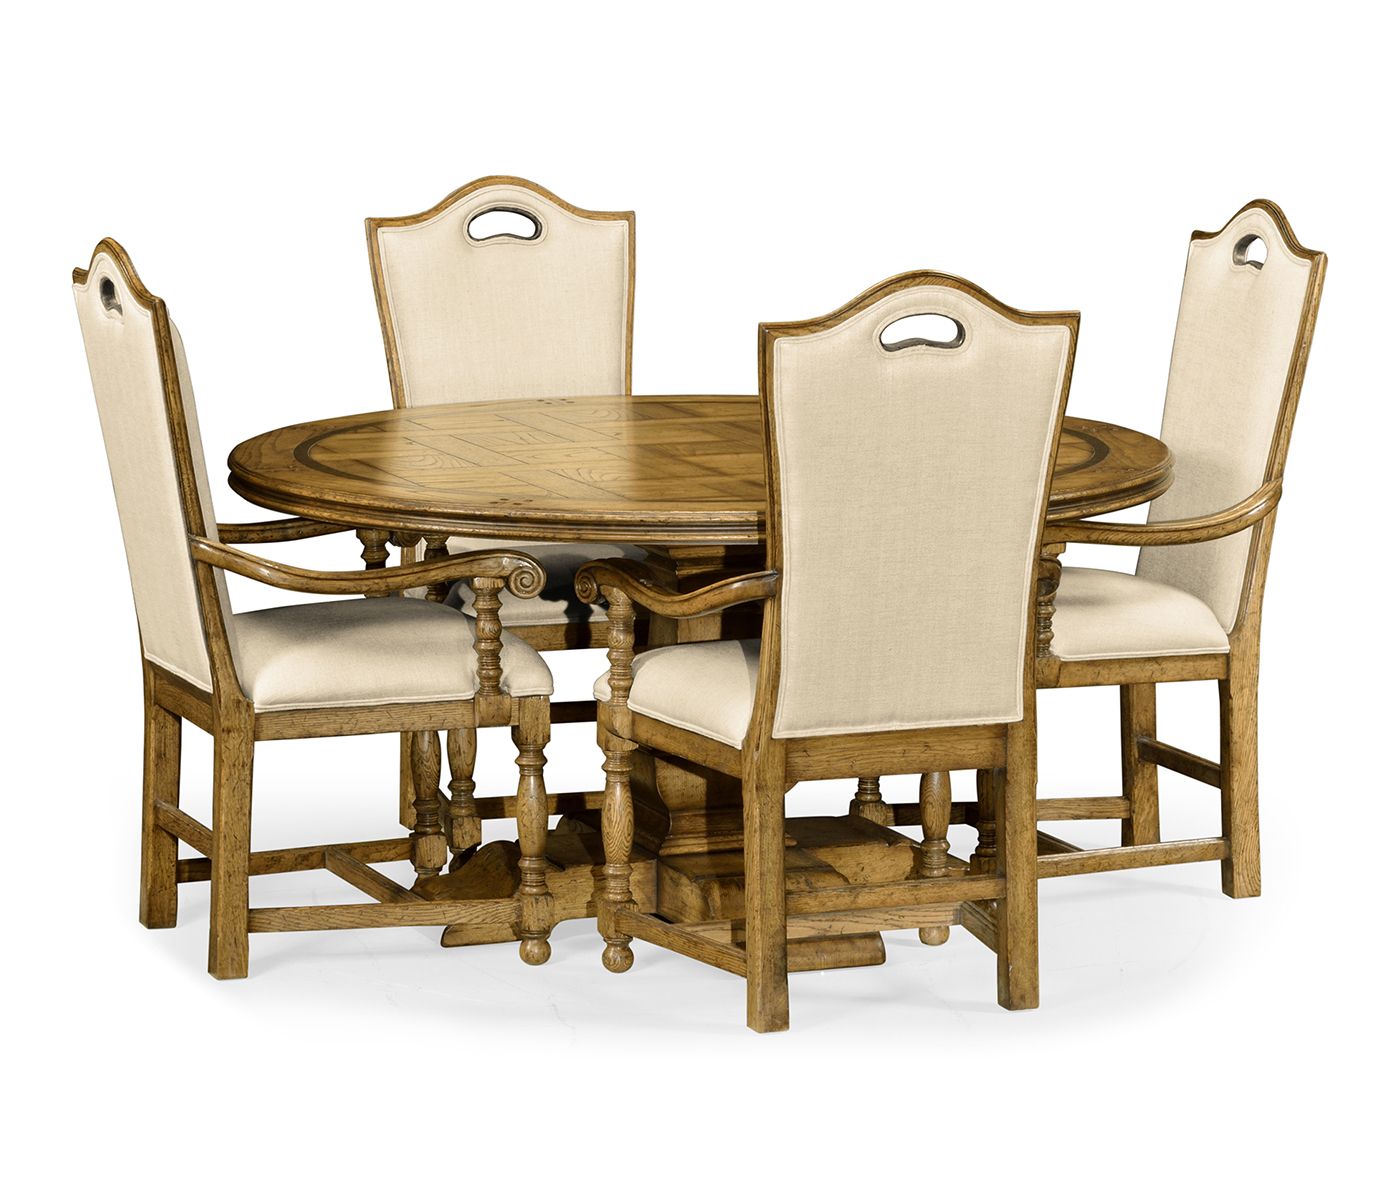 60" Round Light Brown Chestnut Dining Table Pertaining To Best And Newest Light Brown Dining Tables (View 1 of 15)